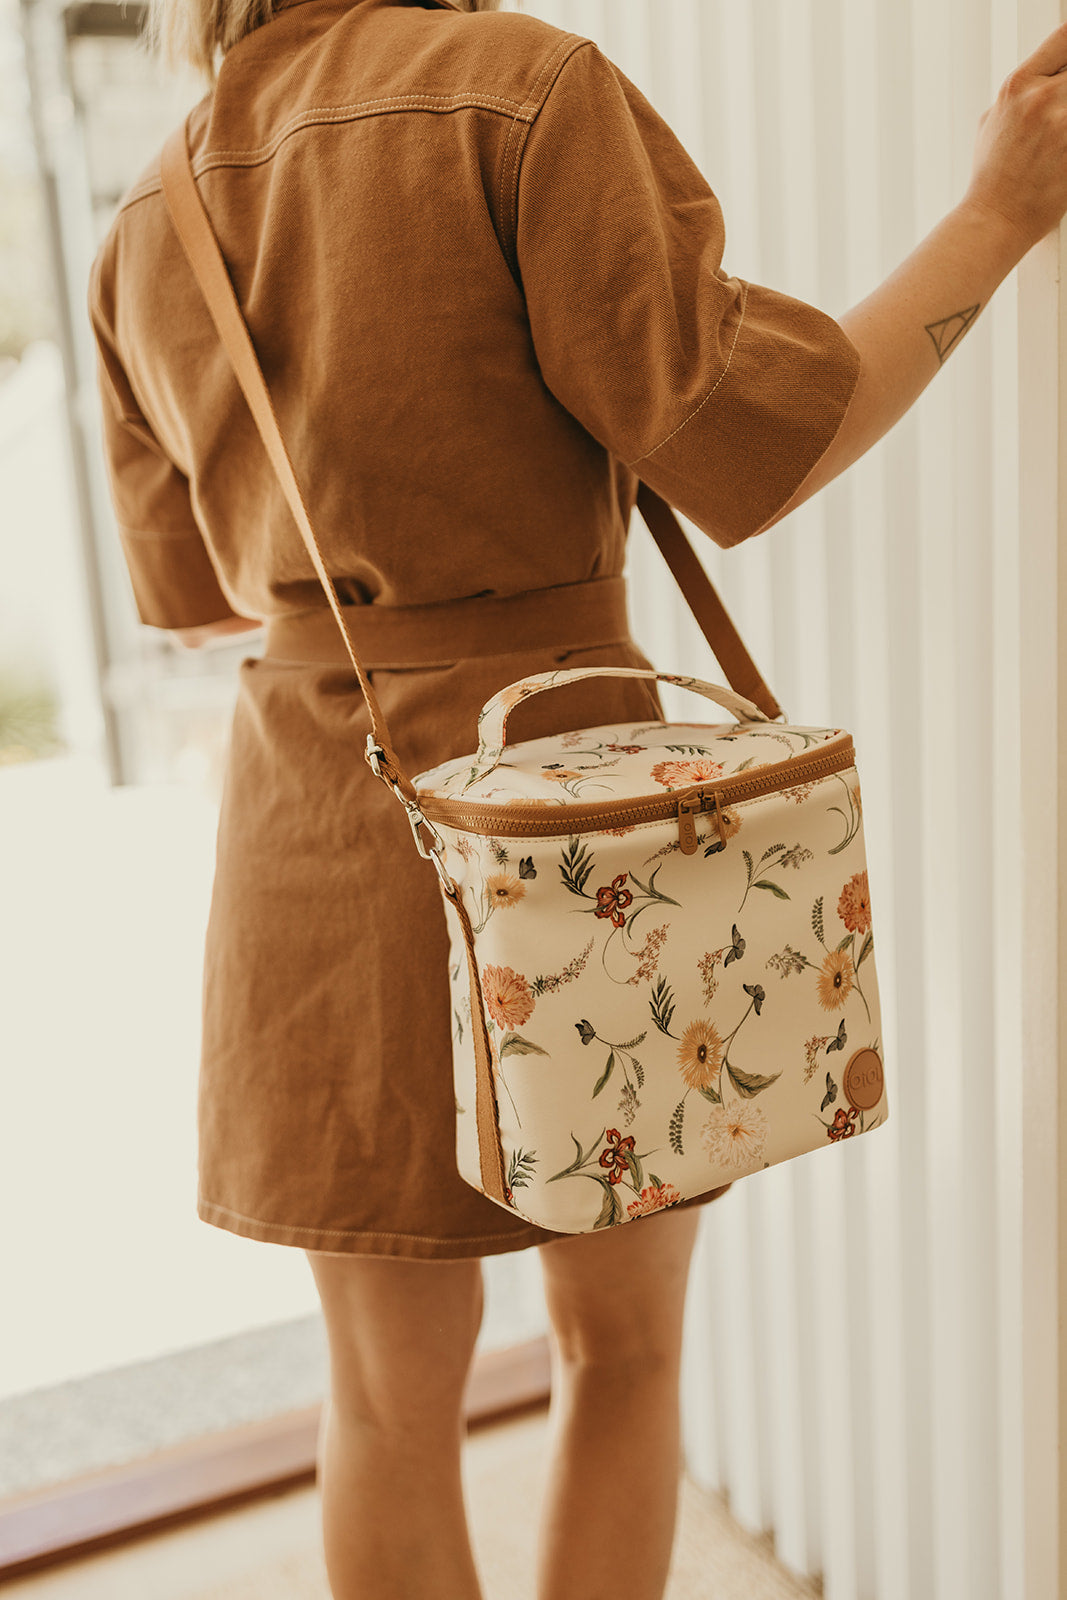 Midi Insulated Lunch Bag- Wildflower